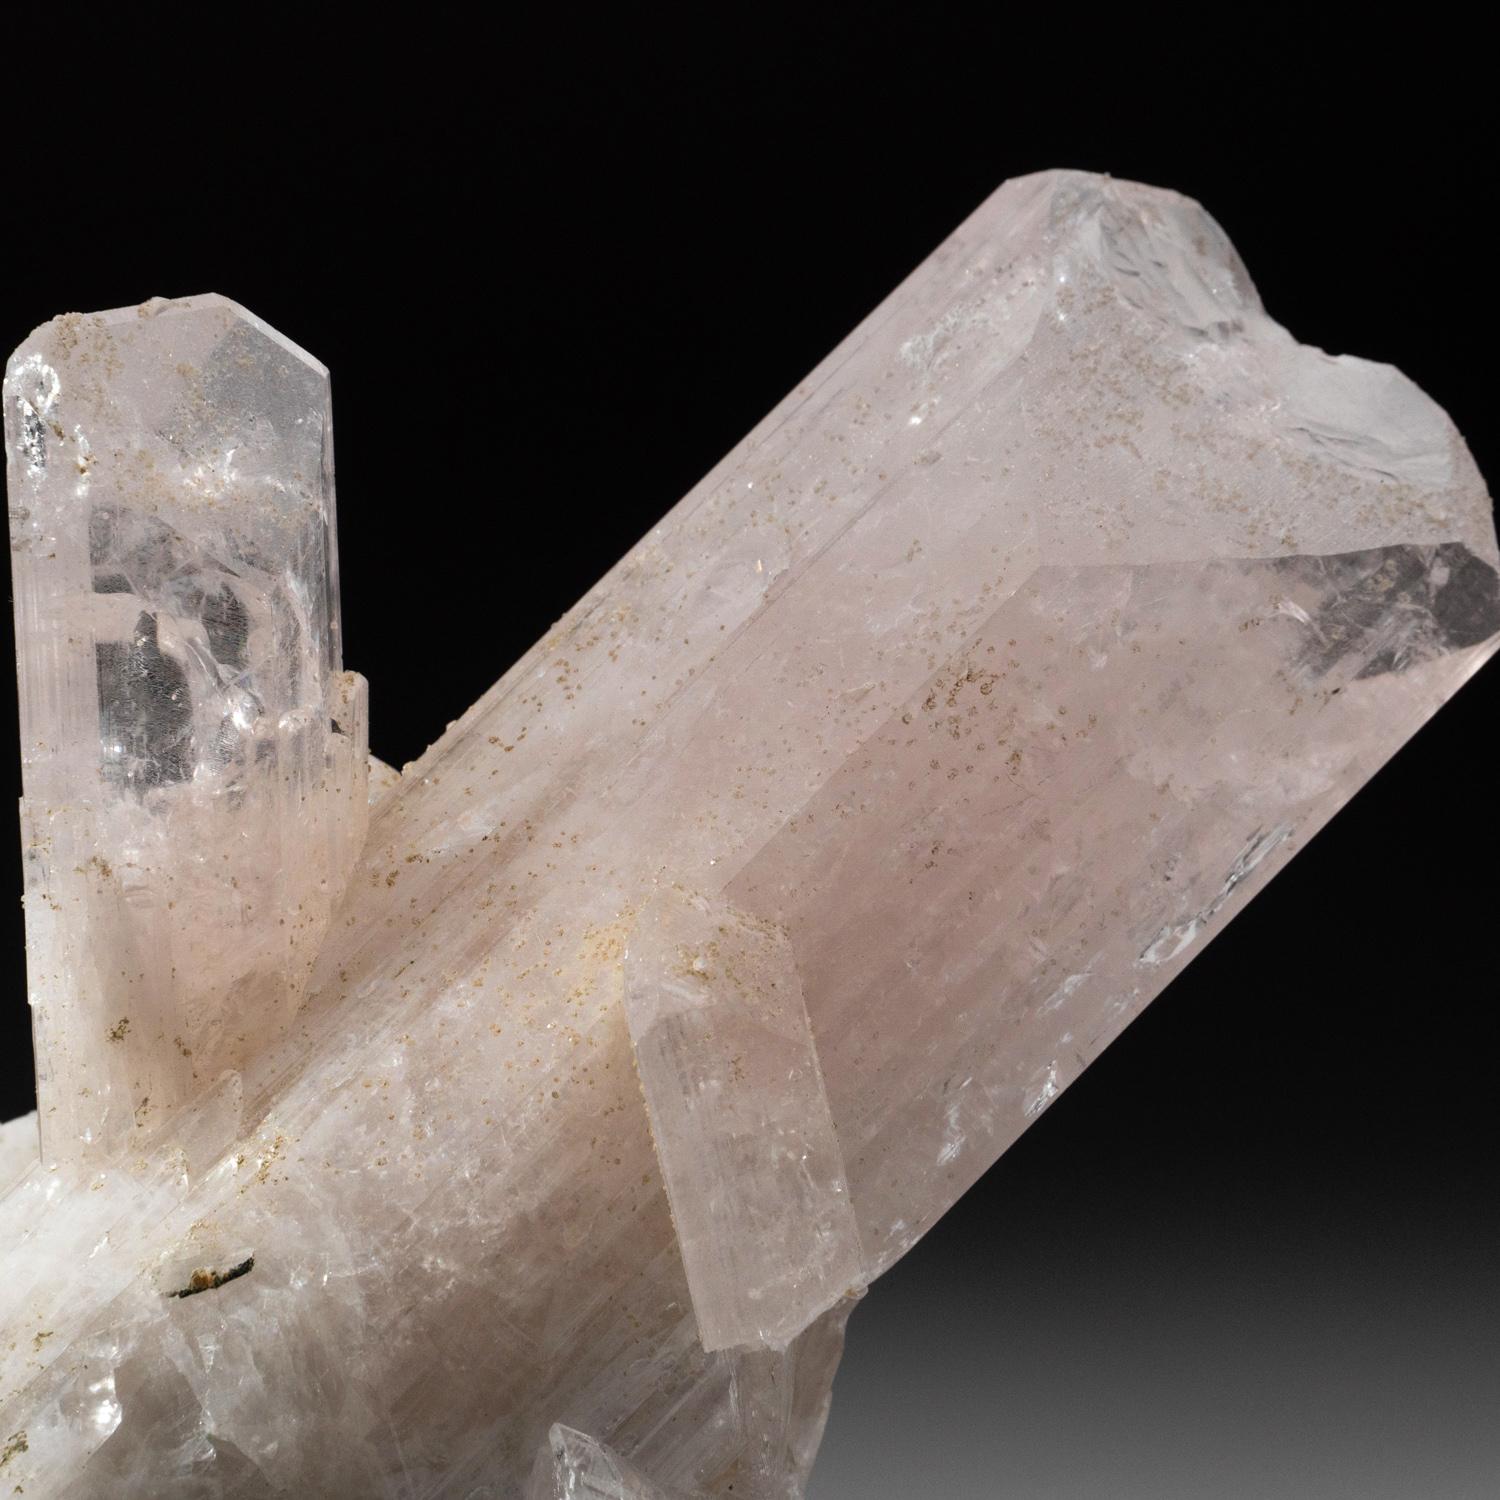 From Mina la Aurora, Charcas District, San Luis Potosi, Mexico. Large transparent to translucent Danburite crystal with secondary growth on matrix. The danburite has lustrous striated crystal faces. This specimen is highly sought after for its